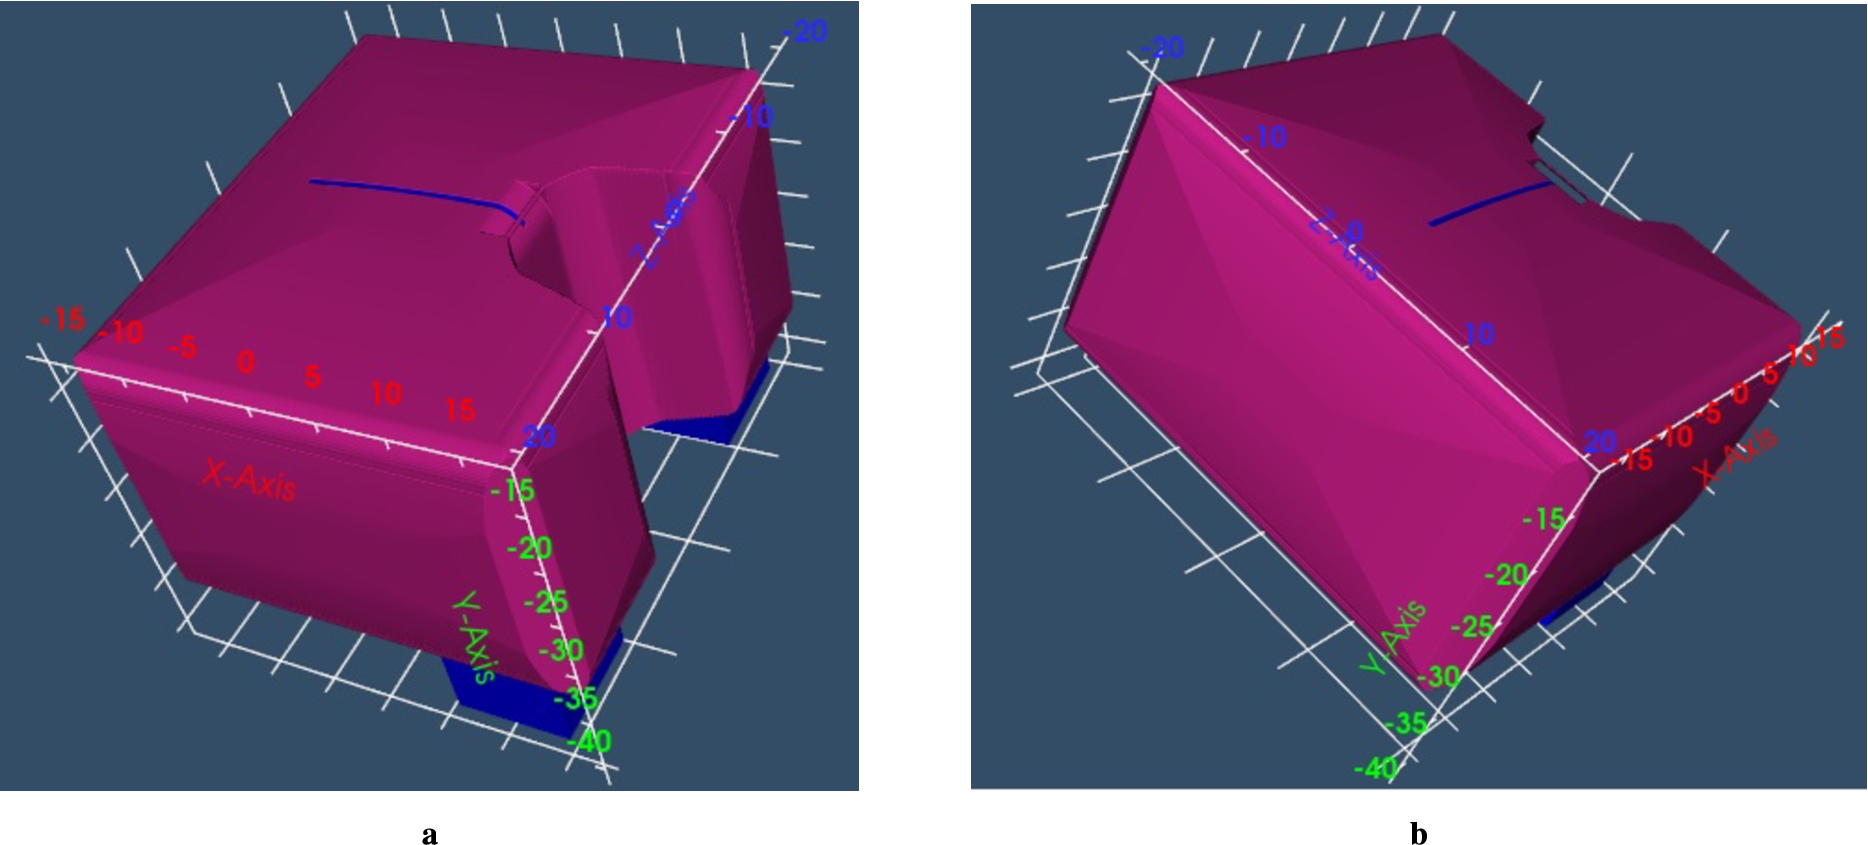 MCNP model of the cold moderator with rounded shapes according to the technical drawing from the engineering team. This view shows the outer surface of cold moderator covered by the Al vessel.